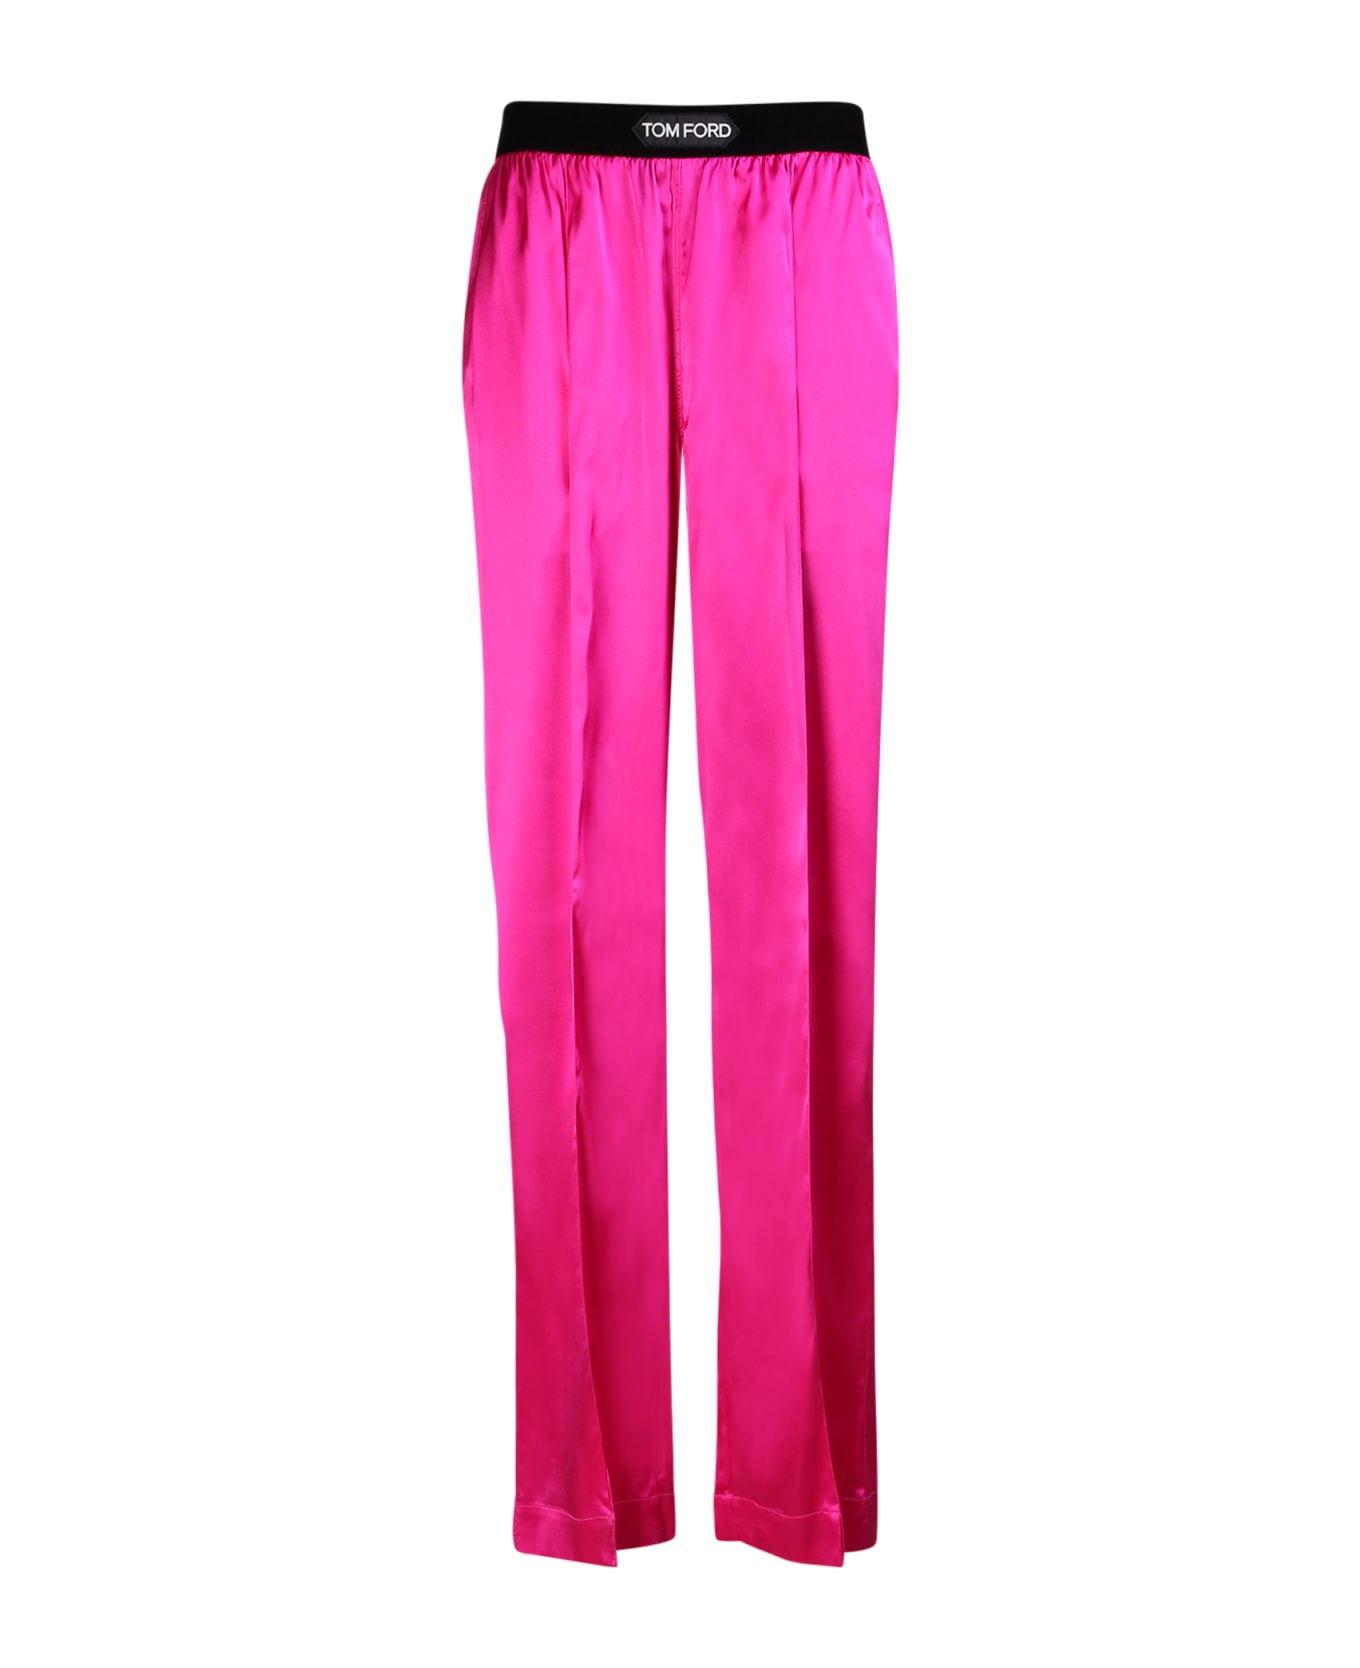 Tom Ford Silk Trousers - HOT PINK ボトムス